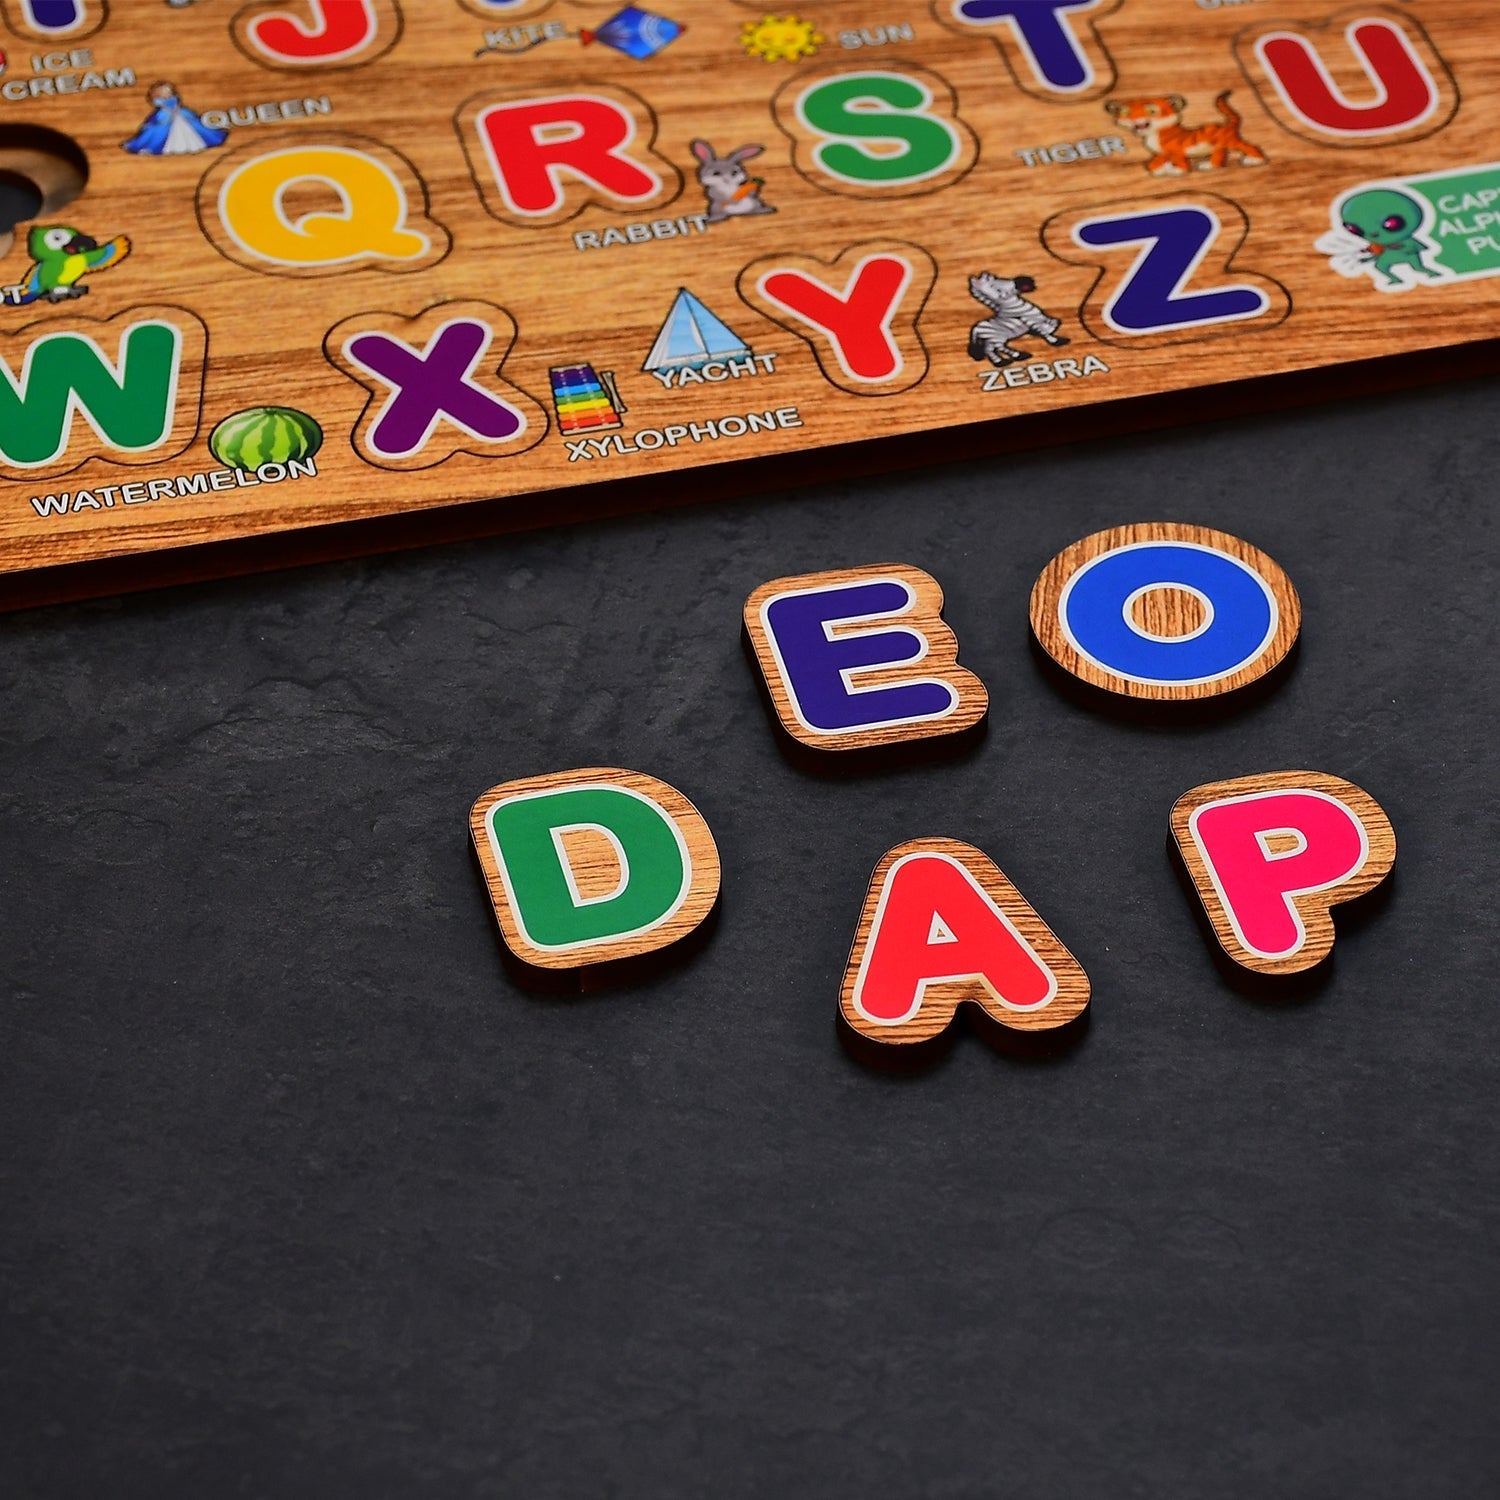 3495 Wooden Capital Alphabets Letters Learning Educational Puzzle Toy for Kids. Amd-Dukandaily